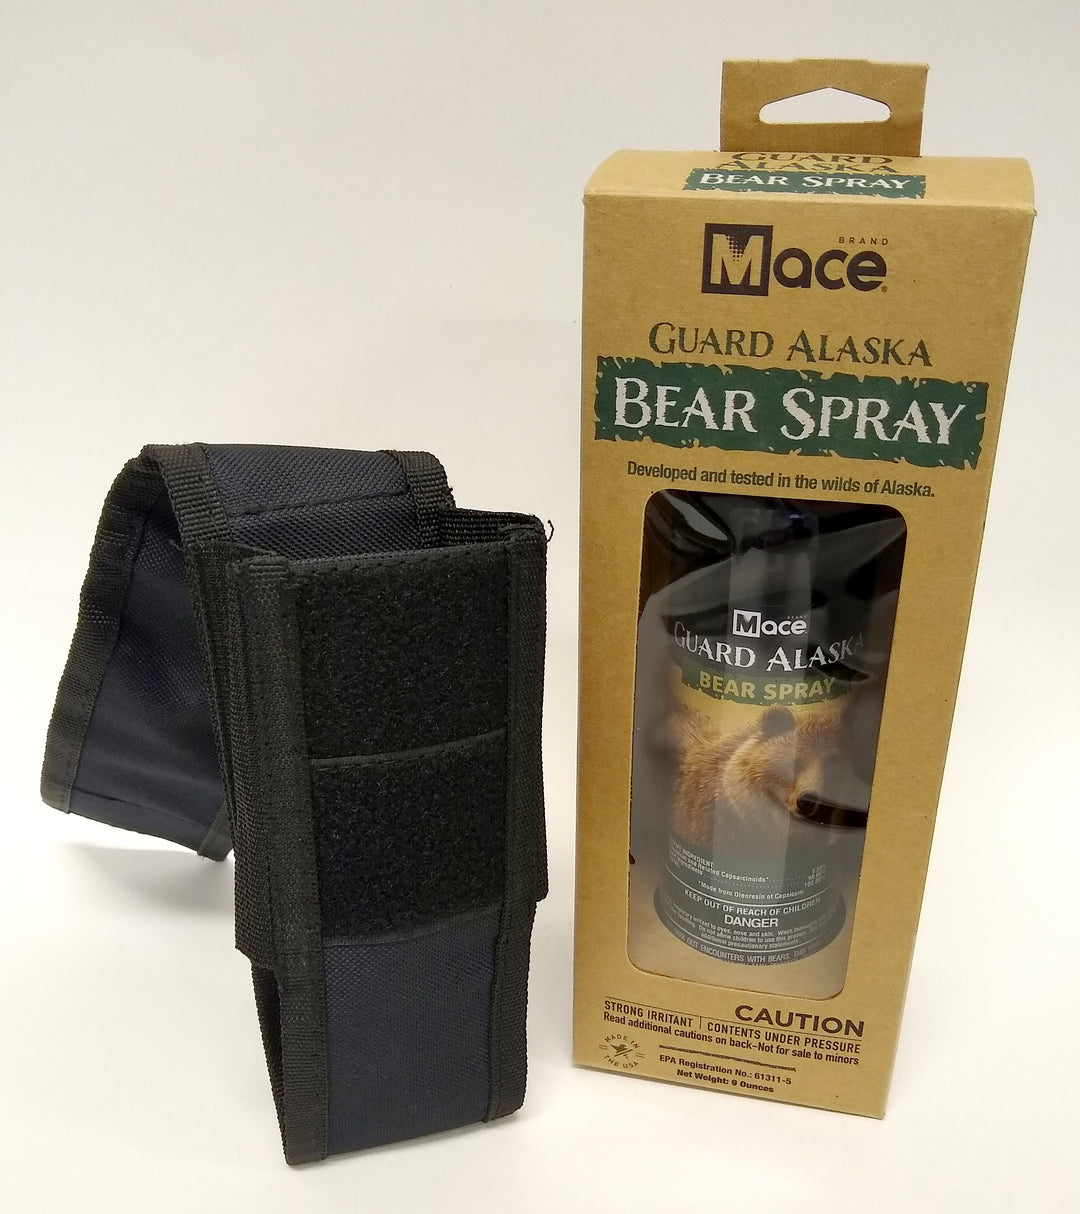 Guard Alaska Bear Spray from Mace®Brand Could Save Your Life